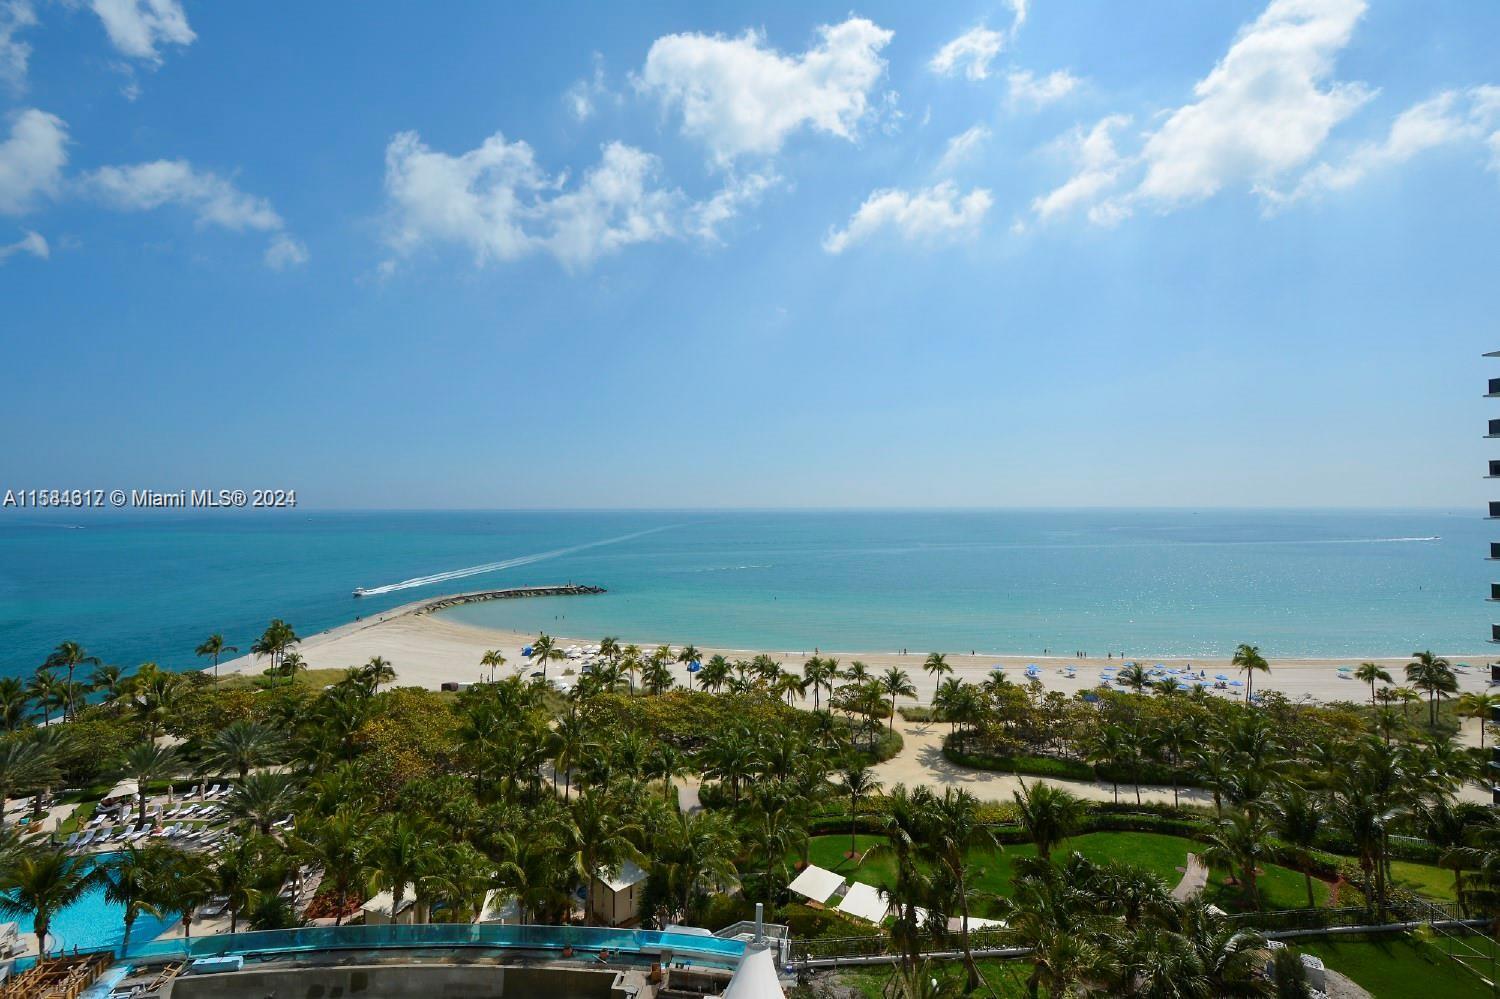 Best 2 Bdr line in the building. Beautiful direct oceanfront 2/2.5 corner unit with 10 FT ceilings, floor to ceiling glass and stunning unobstructed ocean, inlet, city and bay views. The most luxurious living in Bal Harbour offering 5 stars amenities, 24Hr concierge and security, valet parking, beach service,fitness center, 2 pools, Spa, dining, bar, residents theatre, party room. High end appliances including Wolf, Miele, Subzero, Bosch.. European cabinetry. Marble floor. Lots of storage. Laundry room. Could be either Fully furnished or unfurnished. Text Listing Agent for showings.